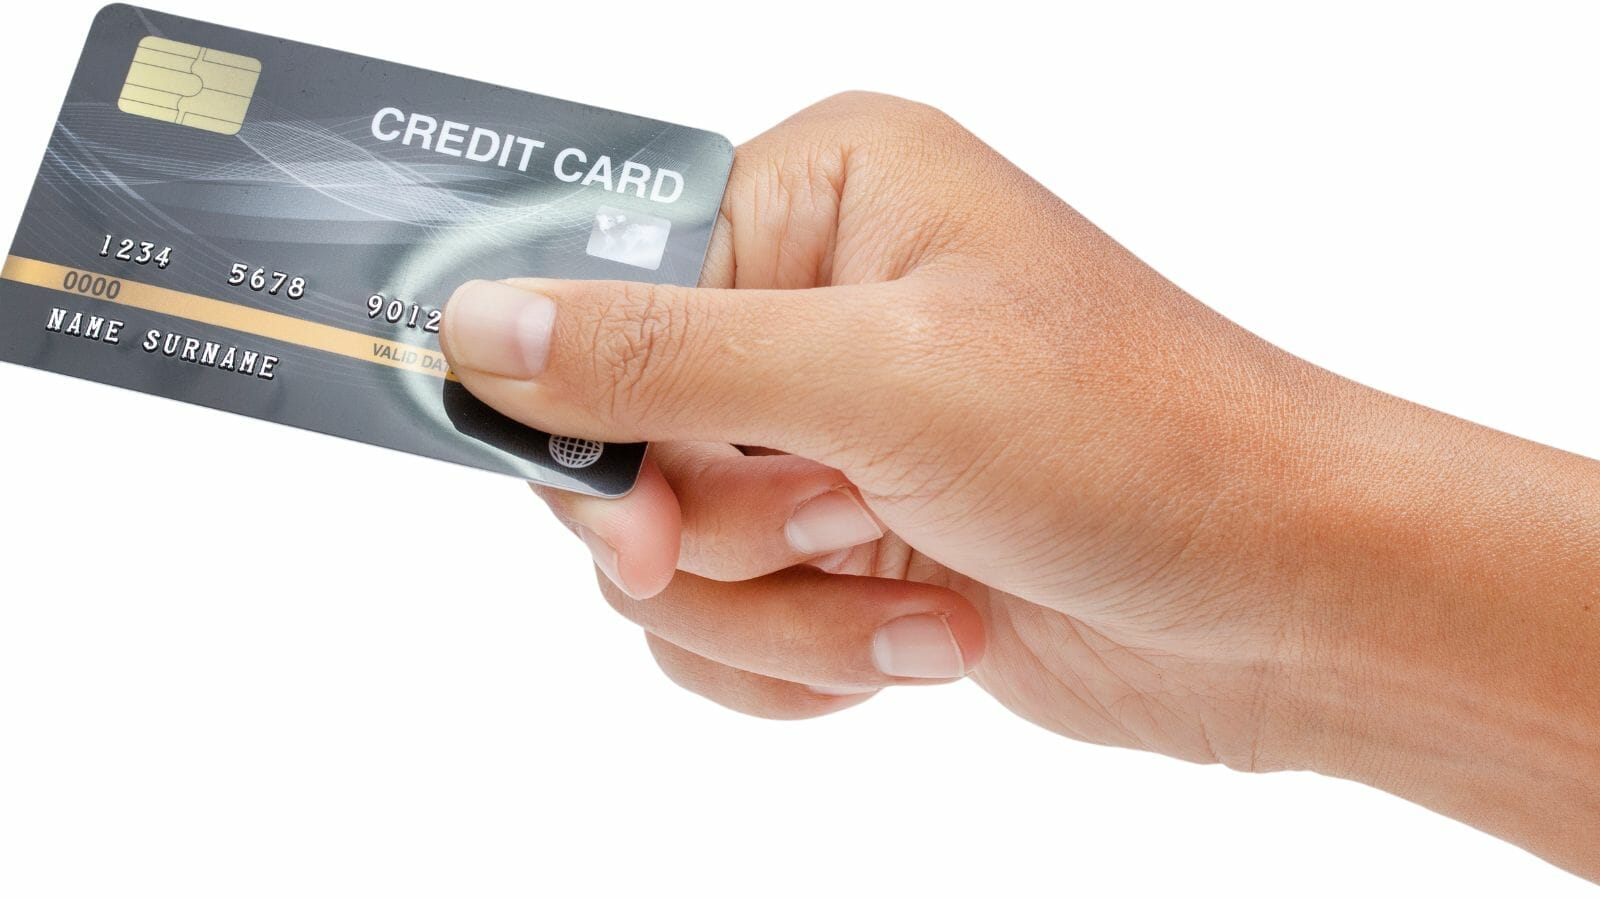 A hand holding a credit card

